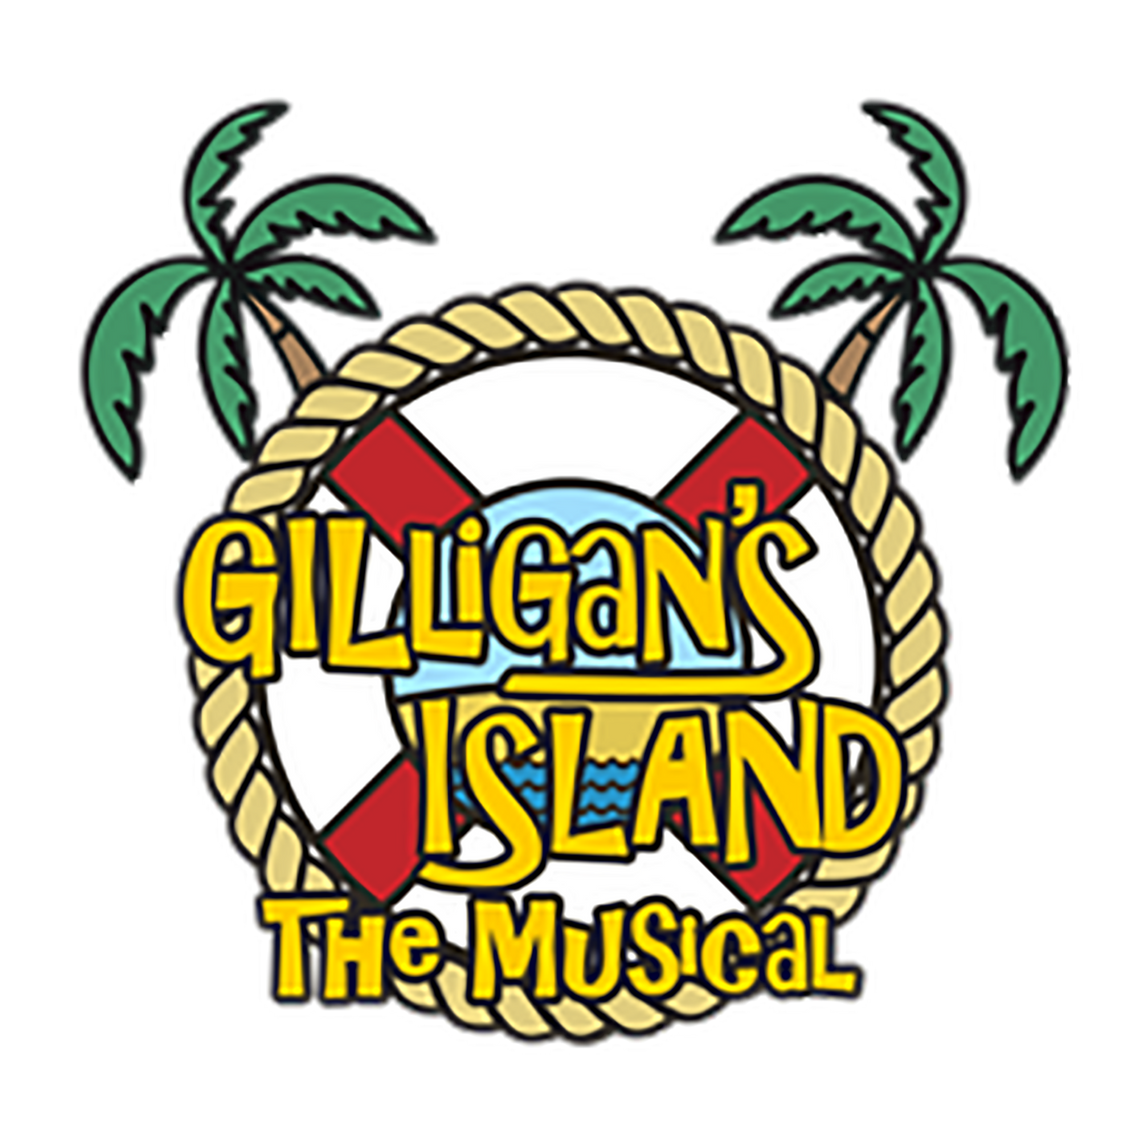 Tickets Now on Sale - “Gilligan’s Island: The Musical”